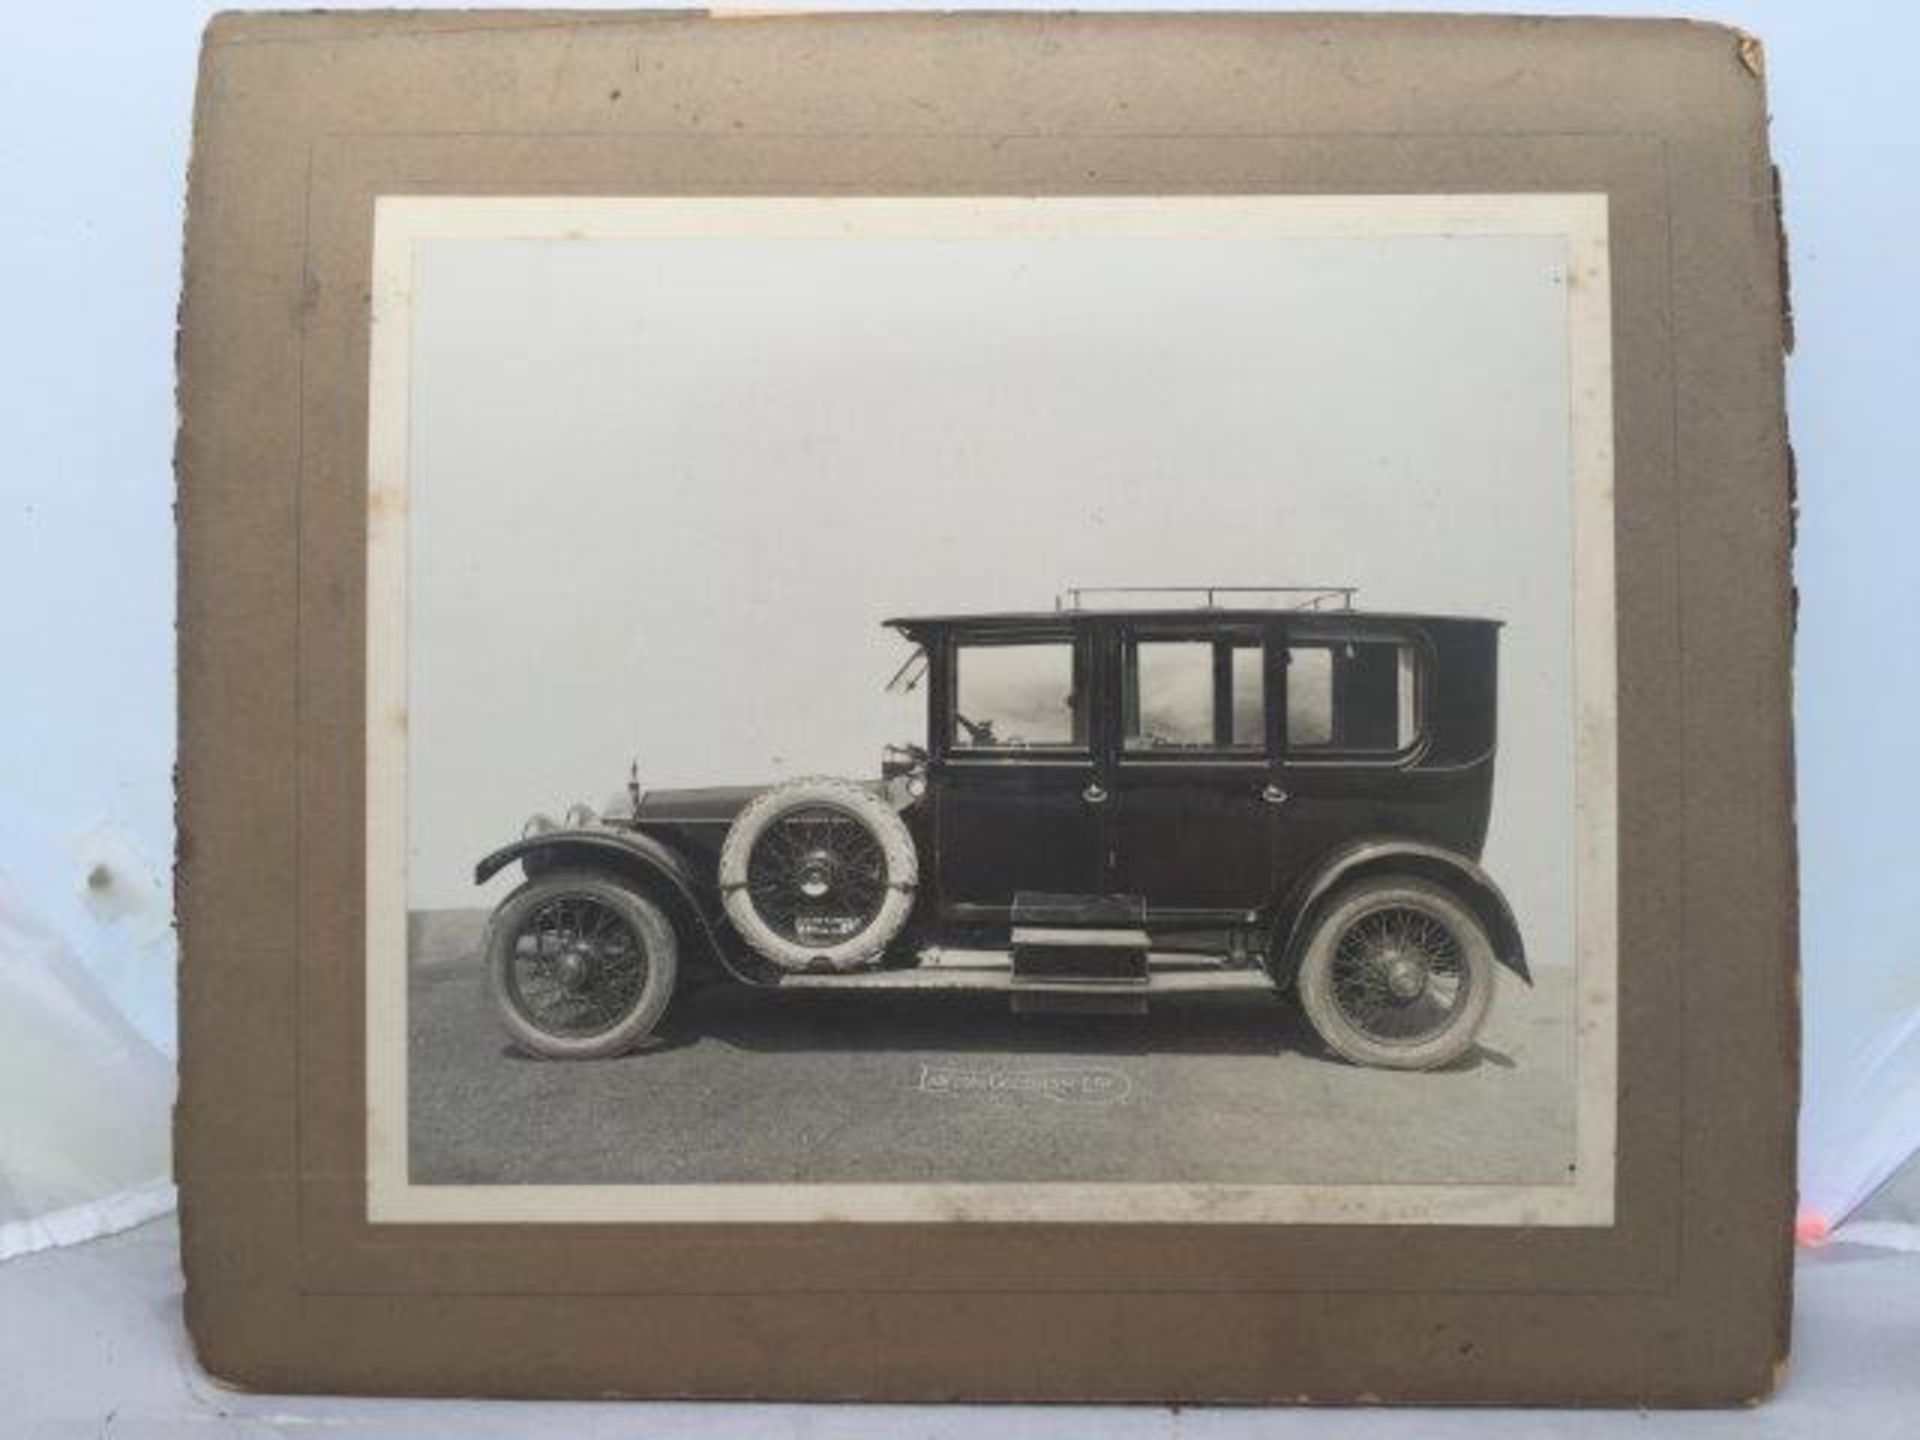 An original sepia coachbuilder's promotional photograph of a Rolls-Royce Silver Ghost, coachbuilt by